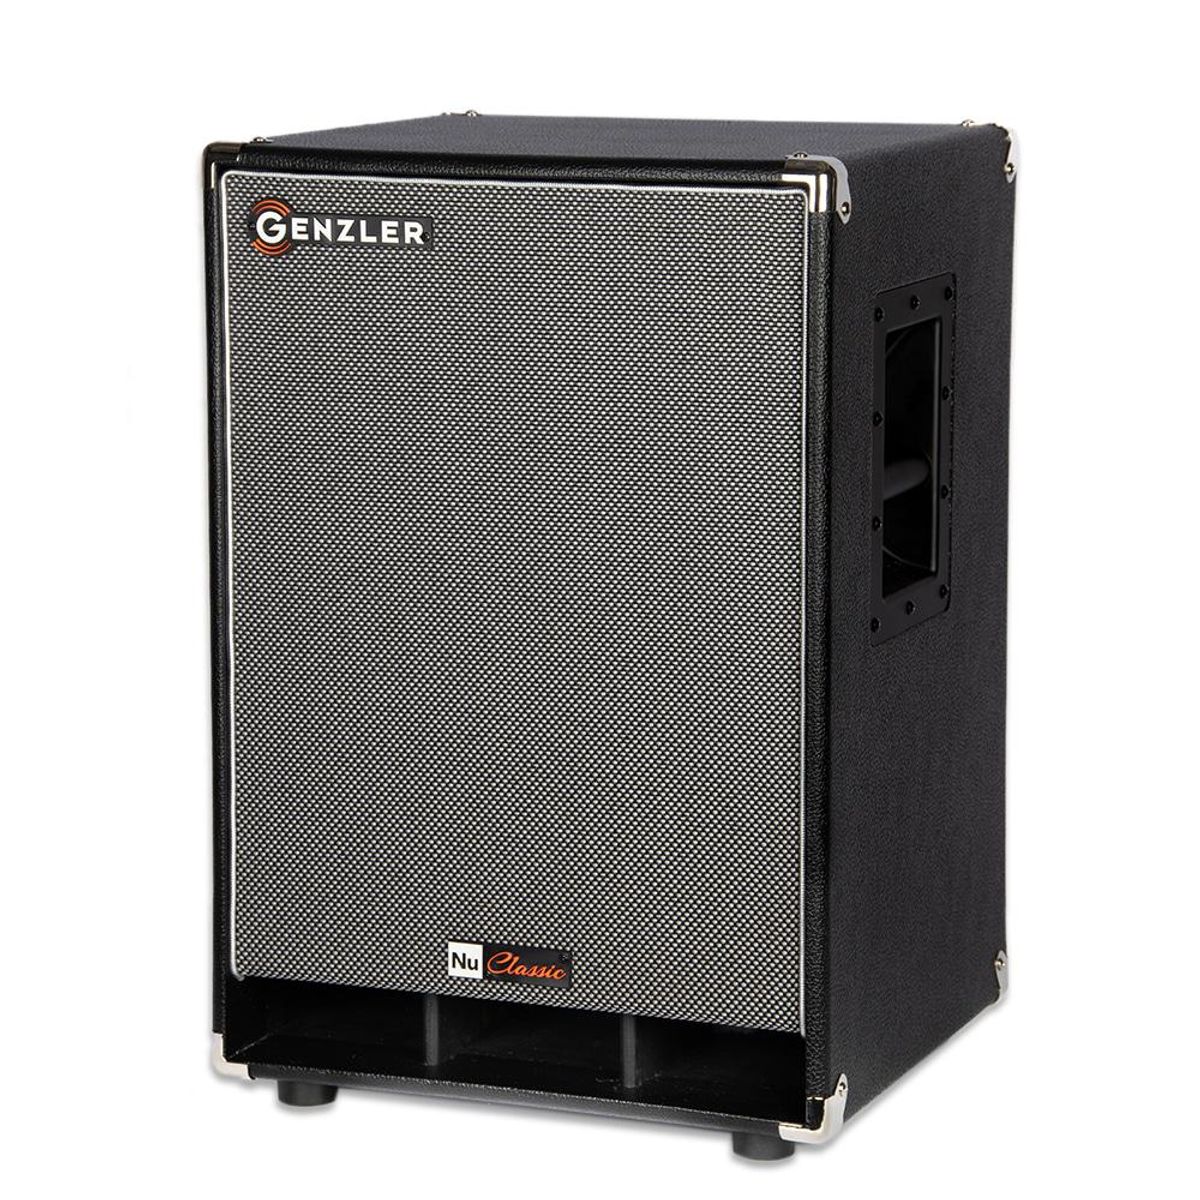 Genzler Amplification Presents the NC-115T Bass Cab